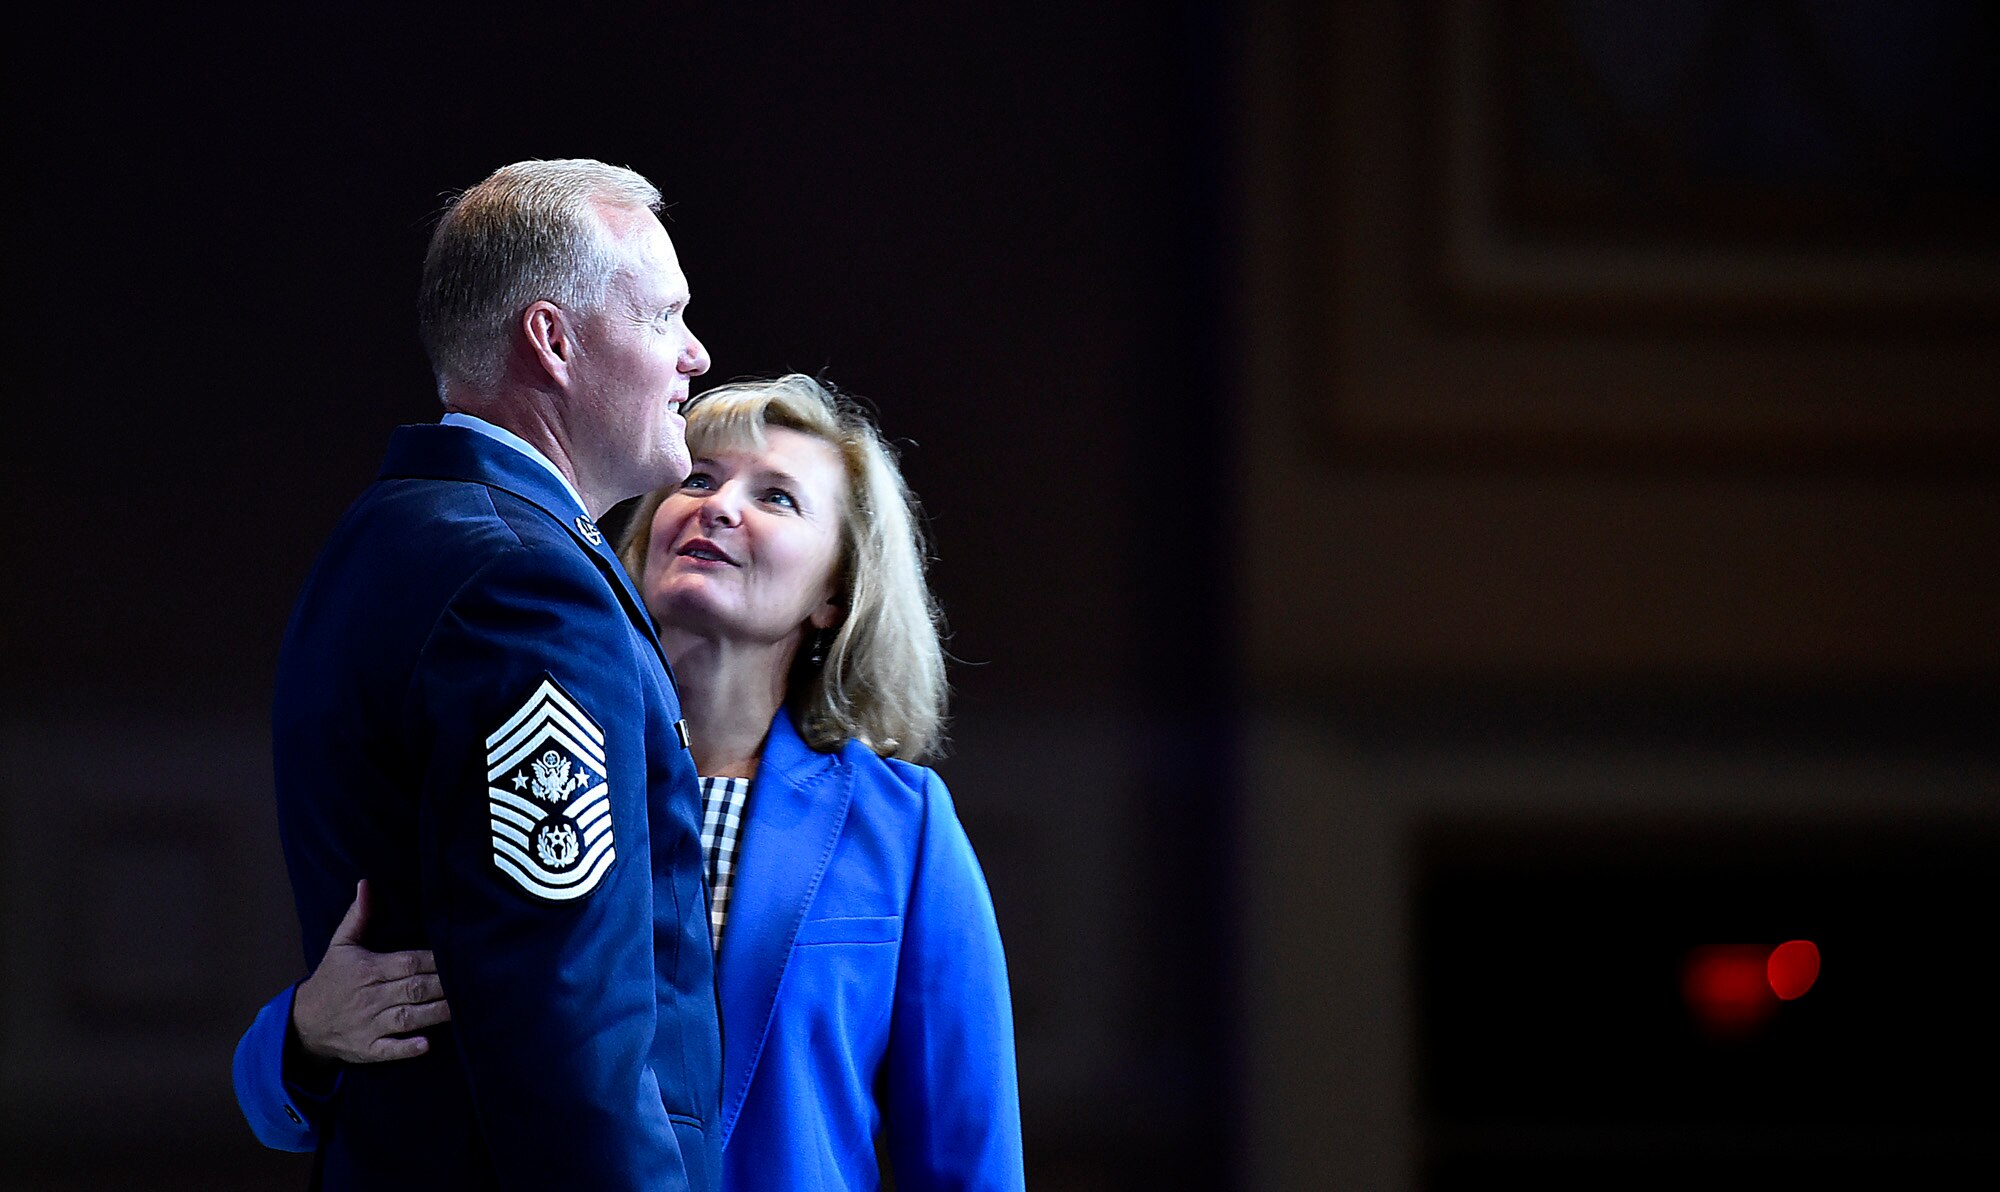 Chief Master Sgt. of the Air Force James A. Cody is joined on stage by his wife, Athena, during a session at the Air Force Association's Air, Space and Cyber Conference in National Harbor, Md., Sept. 21, 2016.  Cody's presentation focused on taking care of Airmen at all levels. (U.S. Air Force photo/Staff Sgt. Alyssa C. Gibson)